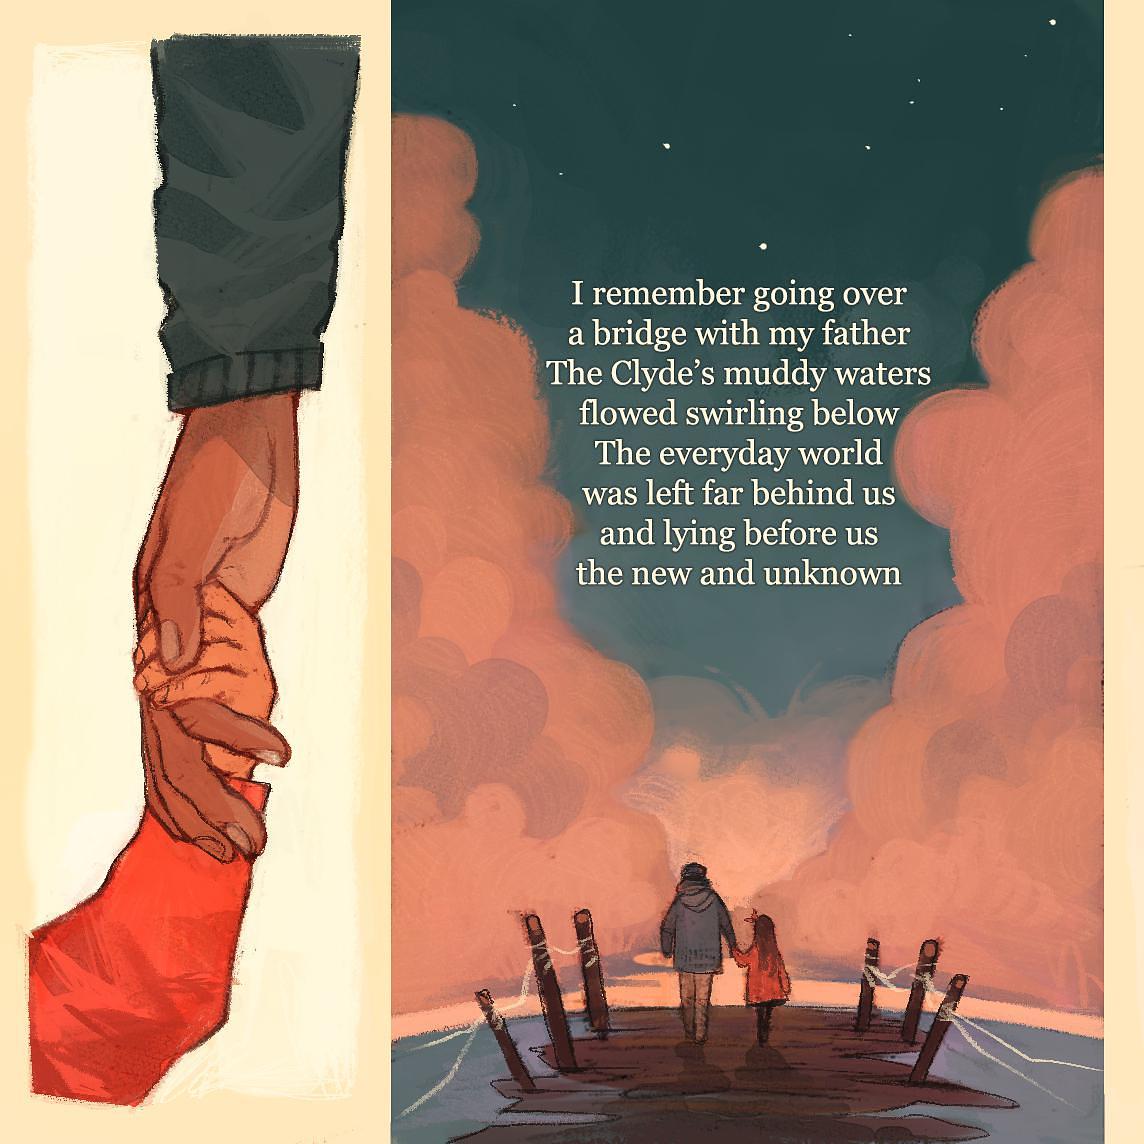 Two panel comic. Comic panel one zooms in on a father and child's held hands. Comic panel two zooms out to full image of the pair walking across a bridge over the Clyde,  surrounded by the starry sky, pink clouds, and the muddy water of the river. Comic panel two is overlaid with text from the first stanza of Epona.